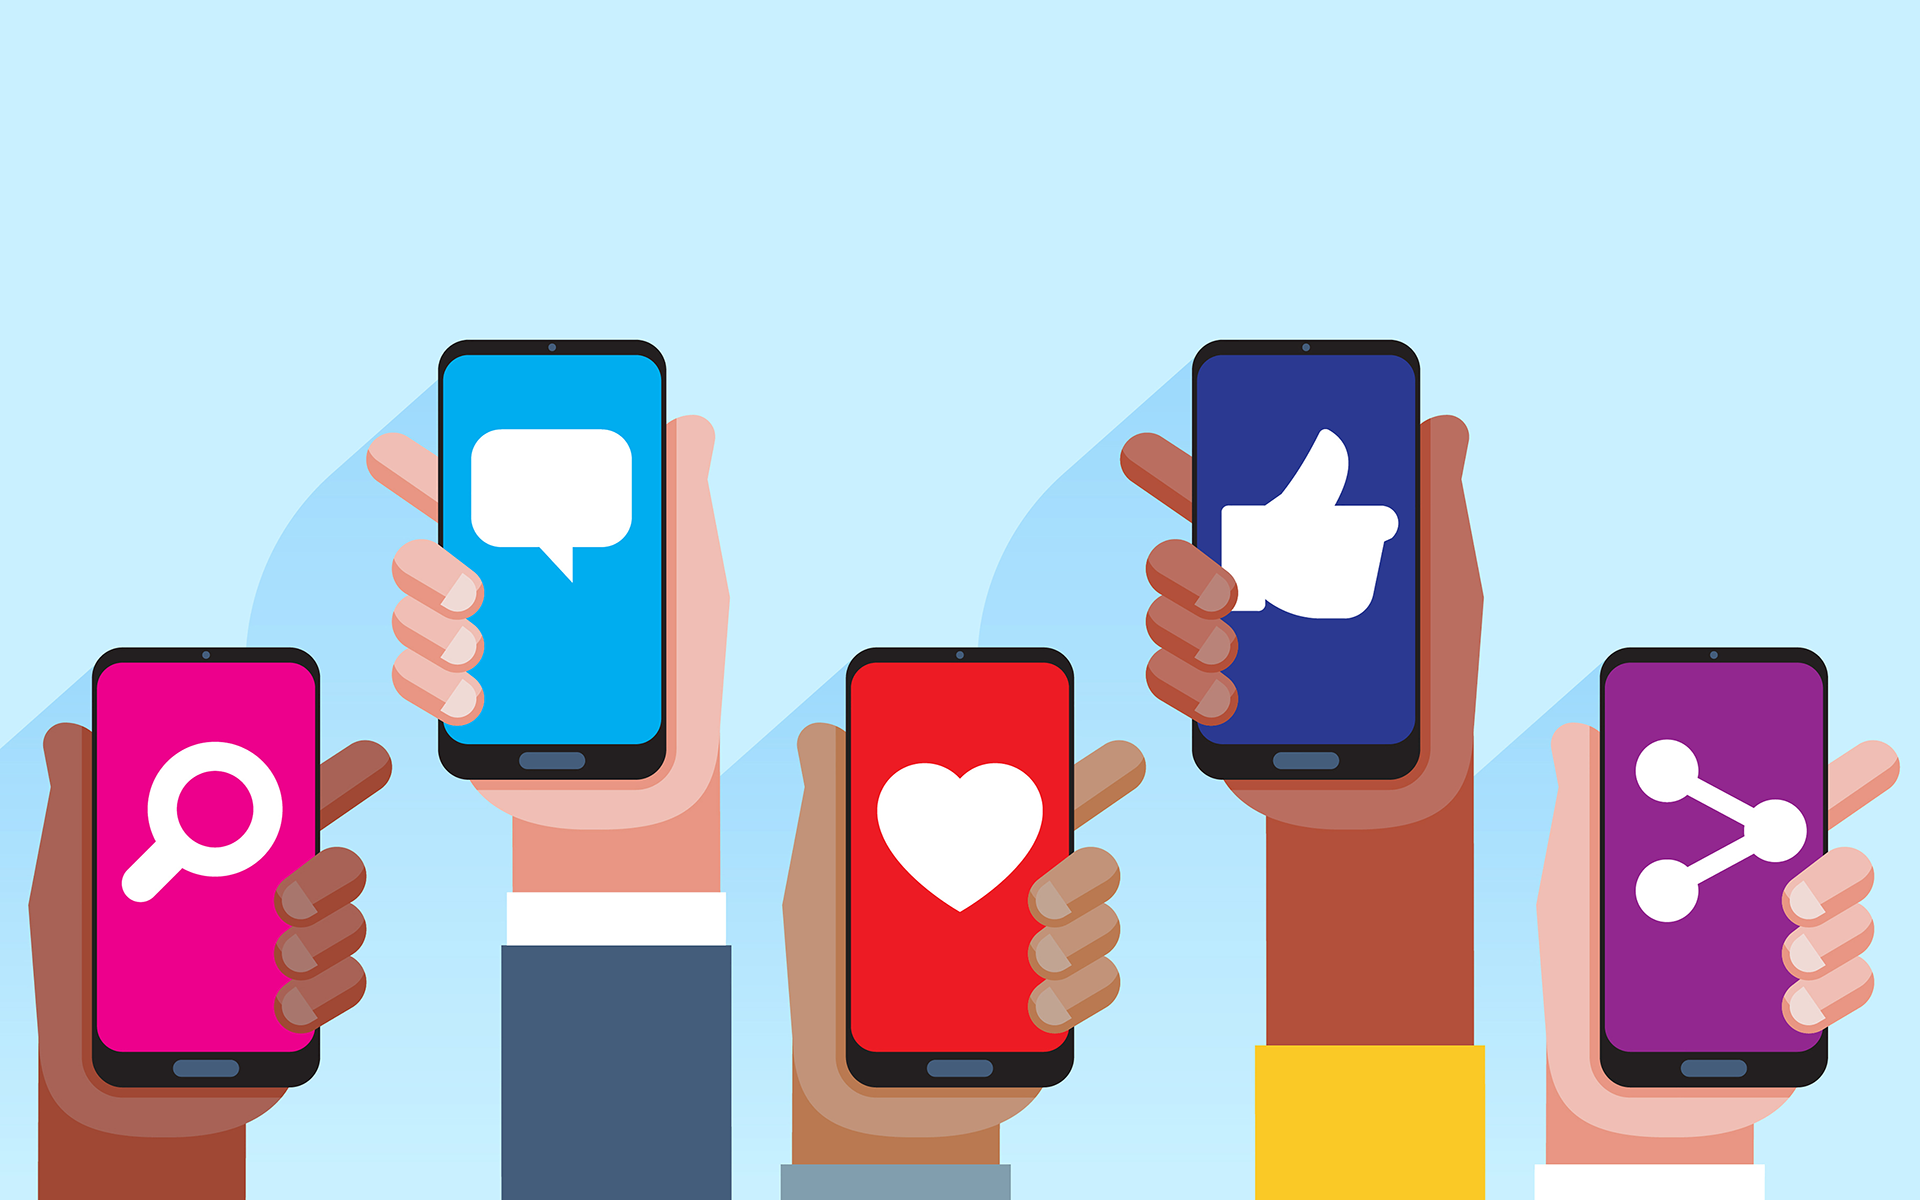 Illustration of five people holding up cell phones that show various social media icons on the their screens. compassionate social media habits